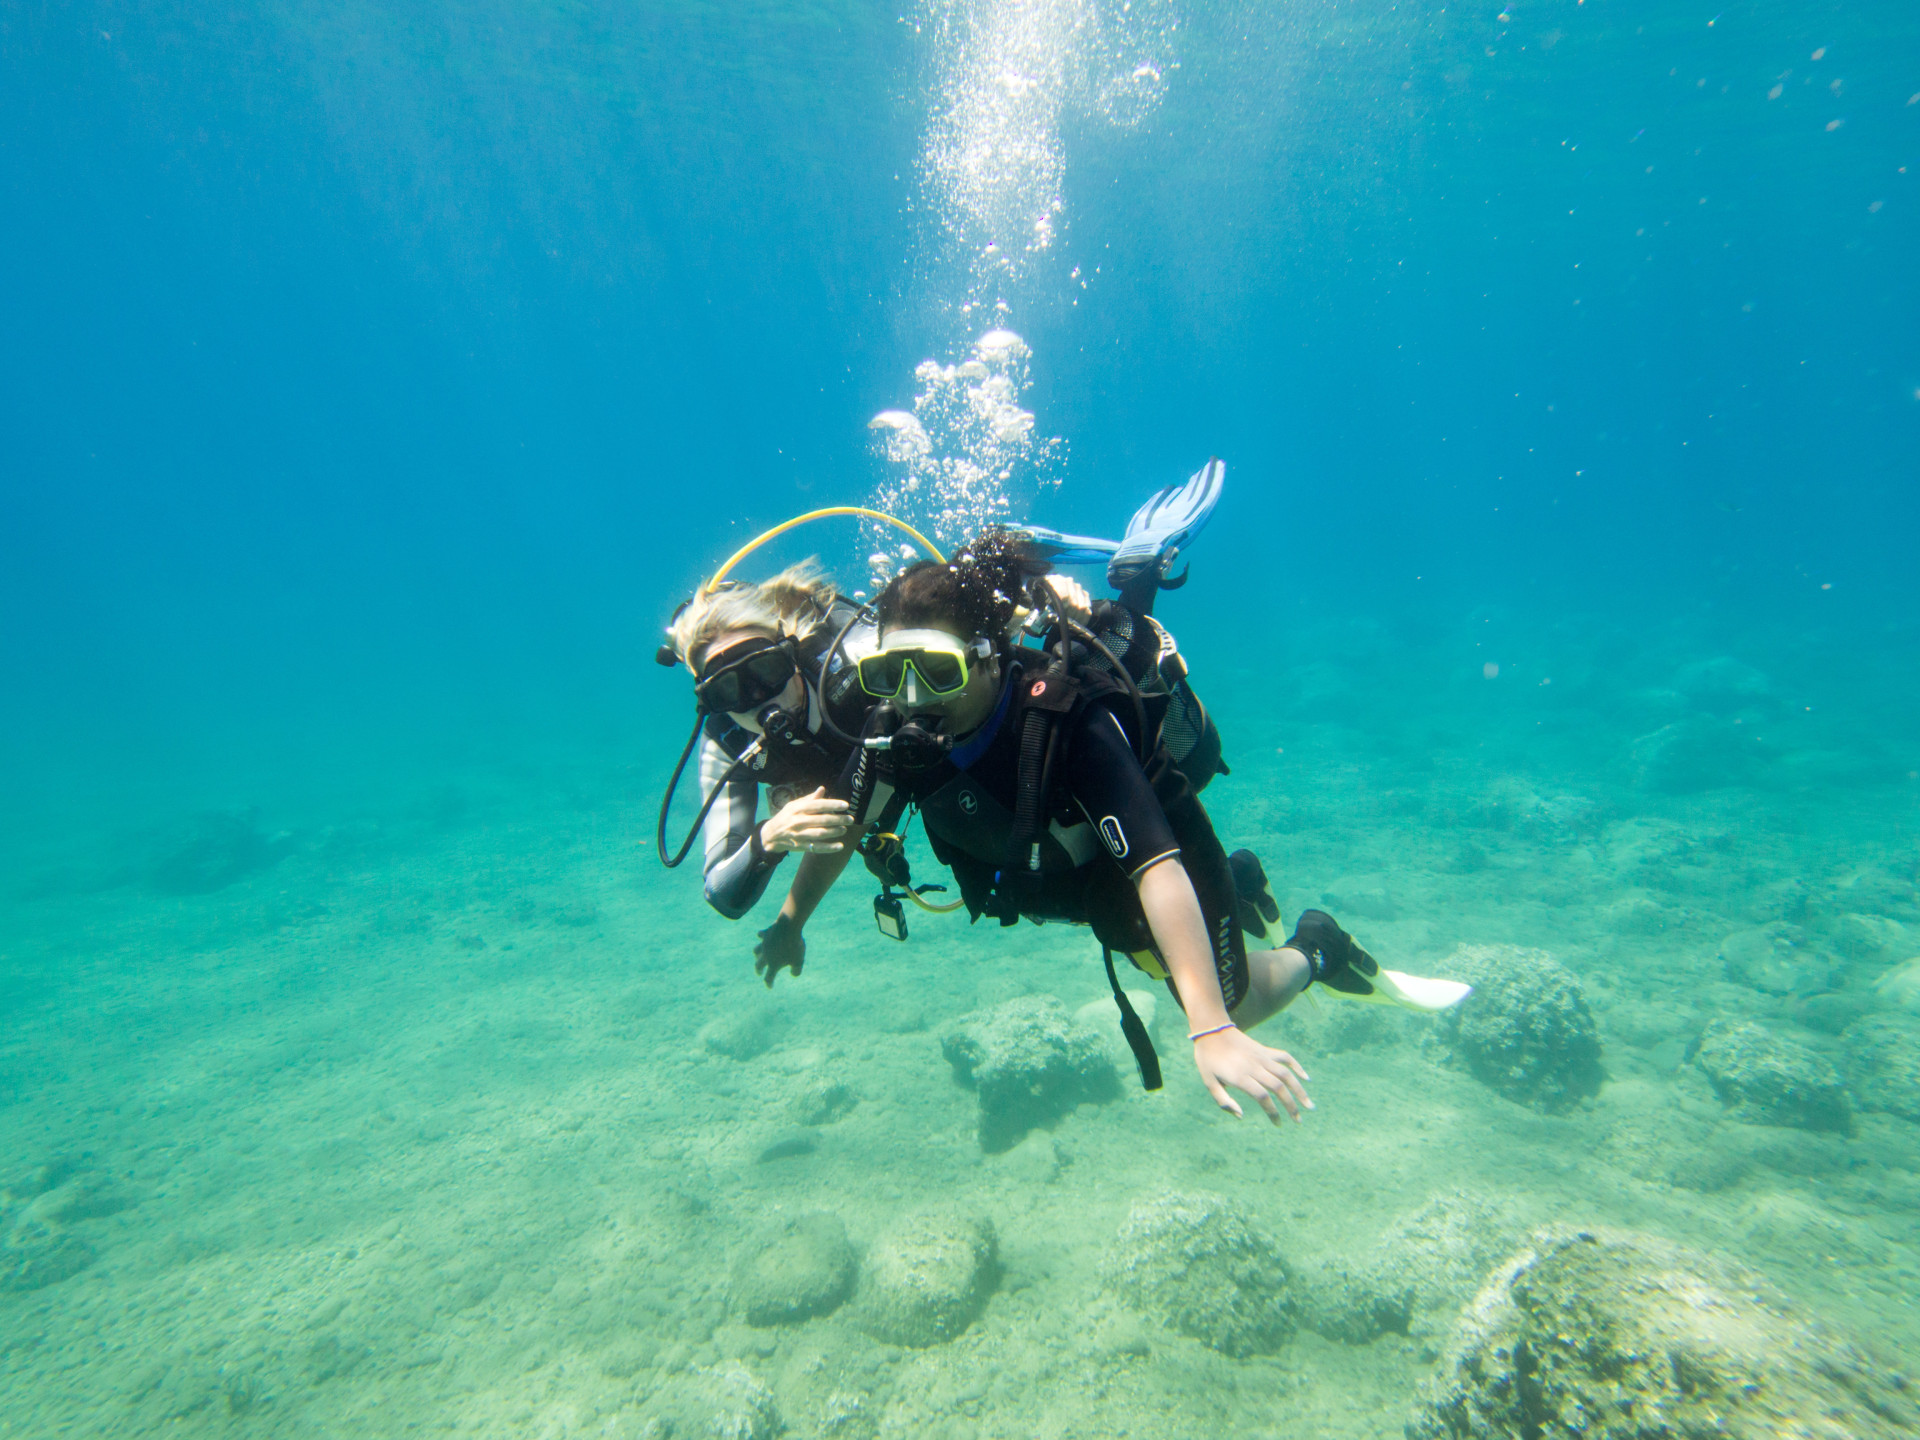 If you're into diving and traveling the world, then becoming an instructor is a great way to combine both.<p><a href="https://www.msn.com/en-us/community/channel/vid-7xx8mnucu55yw63we9va2gwr7uihbxwc68fxqp25x6tg4ftibpra?cvid=94631541bc0f4f89bfd59158d696ad7e">Follow us and access great exclusive content every day</a></p>